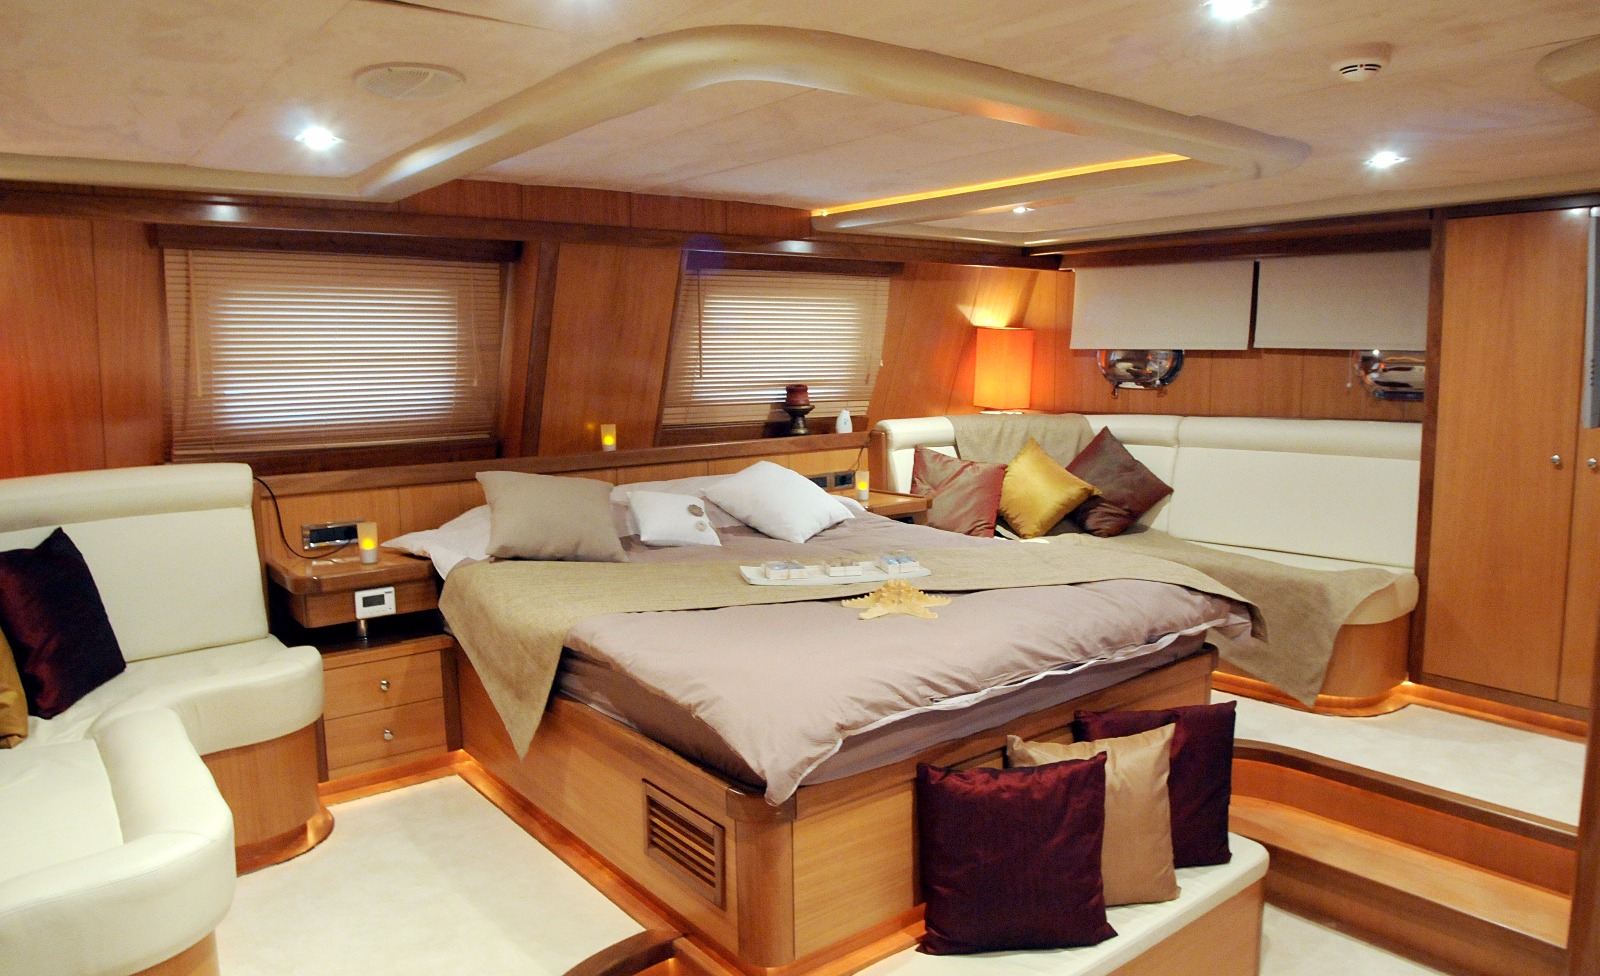 CABIN SPACE